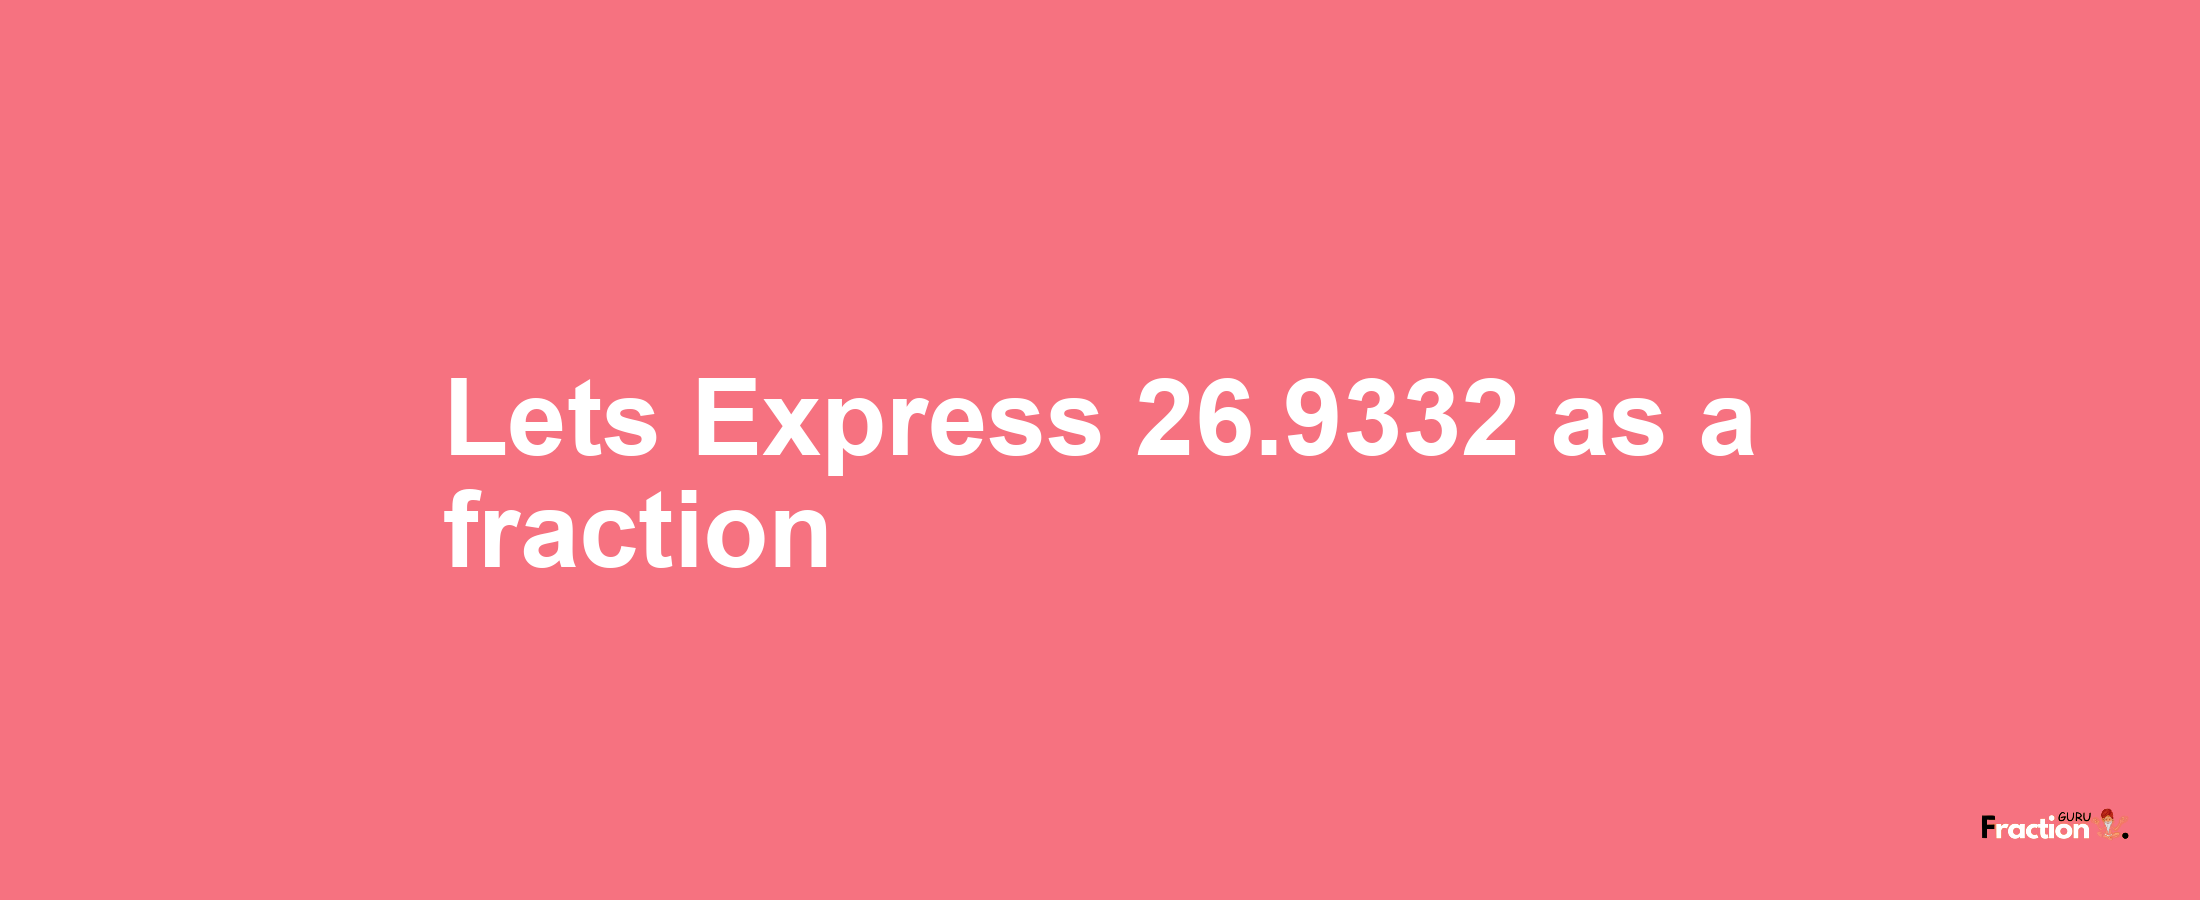 Lets Express 26.9332 as afraction